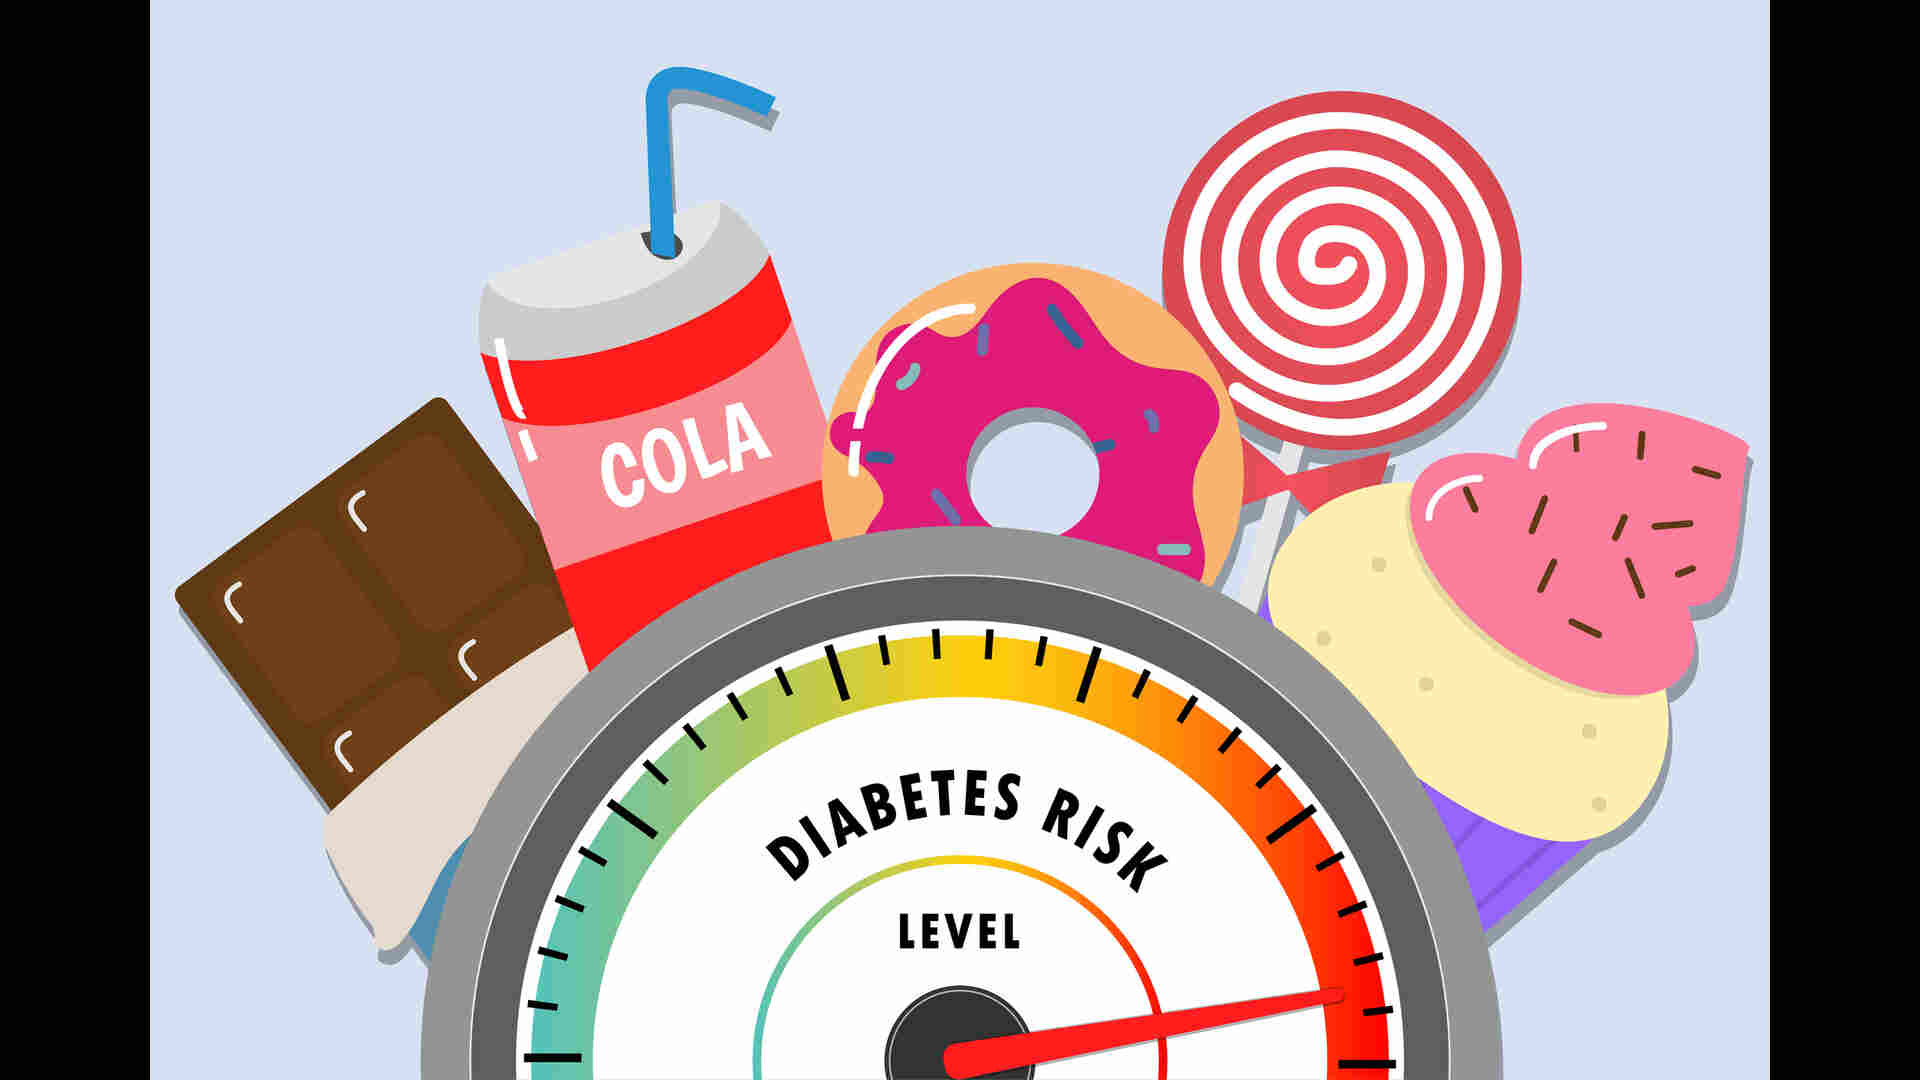 Spotting Diabetes : Identifying the Risk Factors and Early Warning Signs